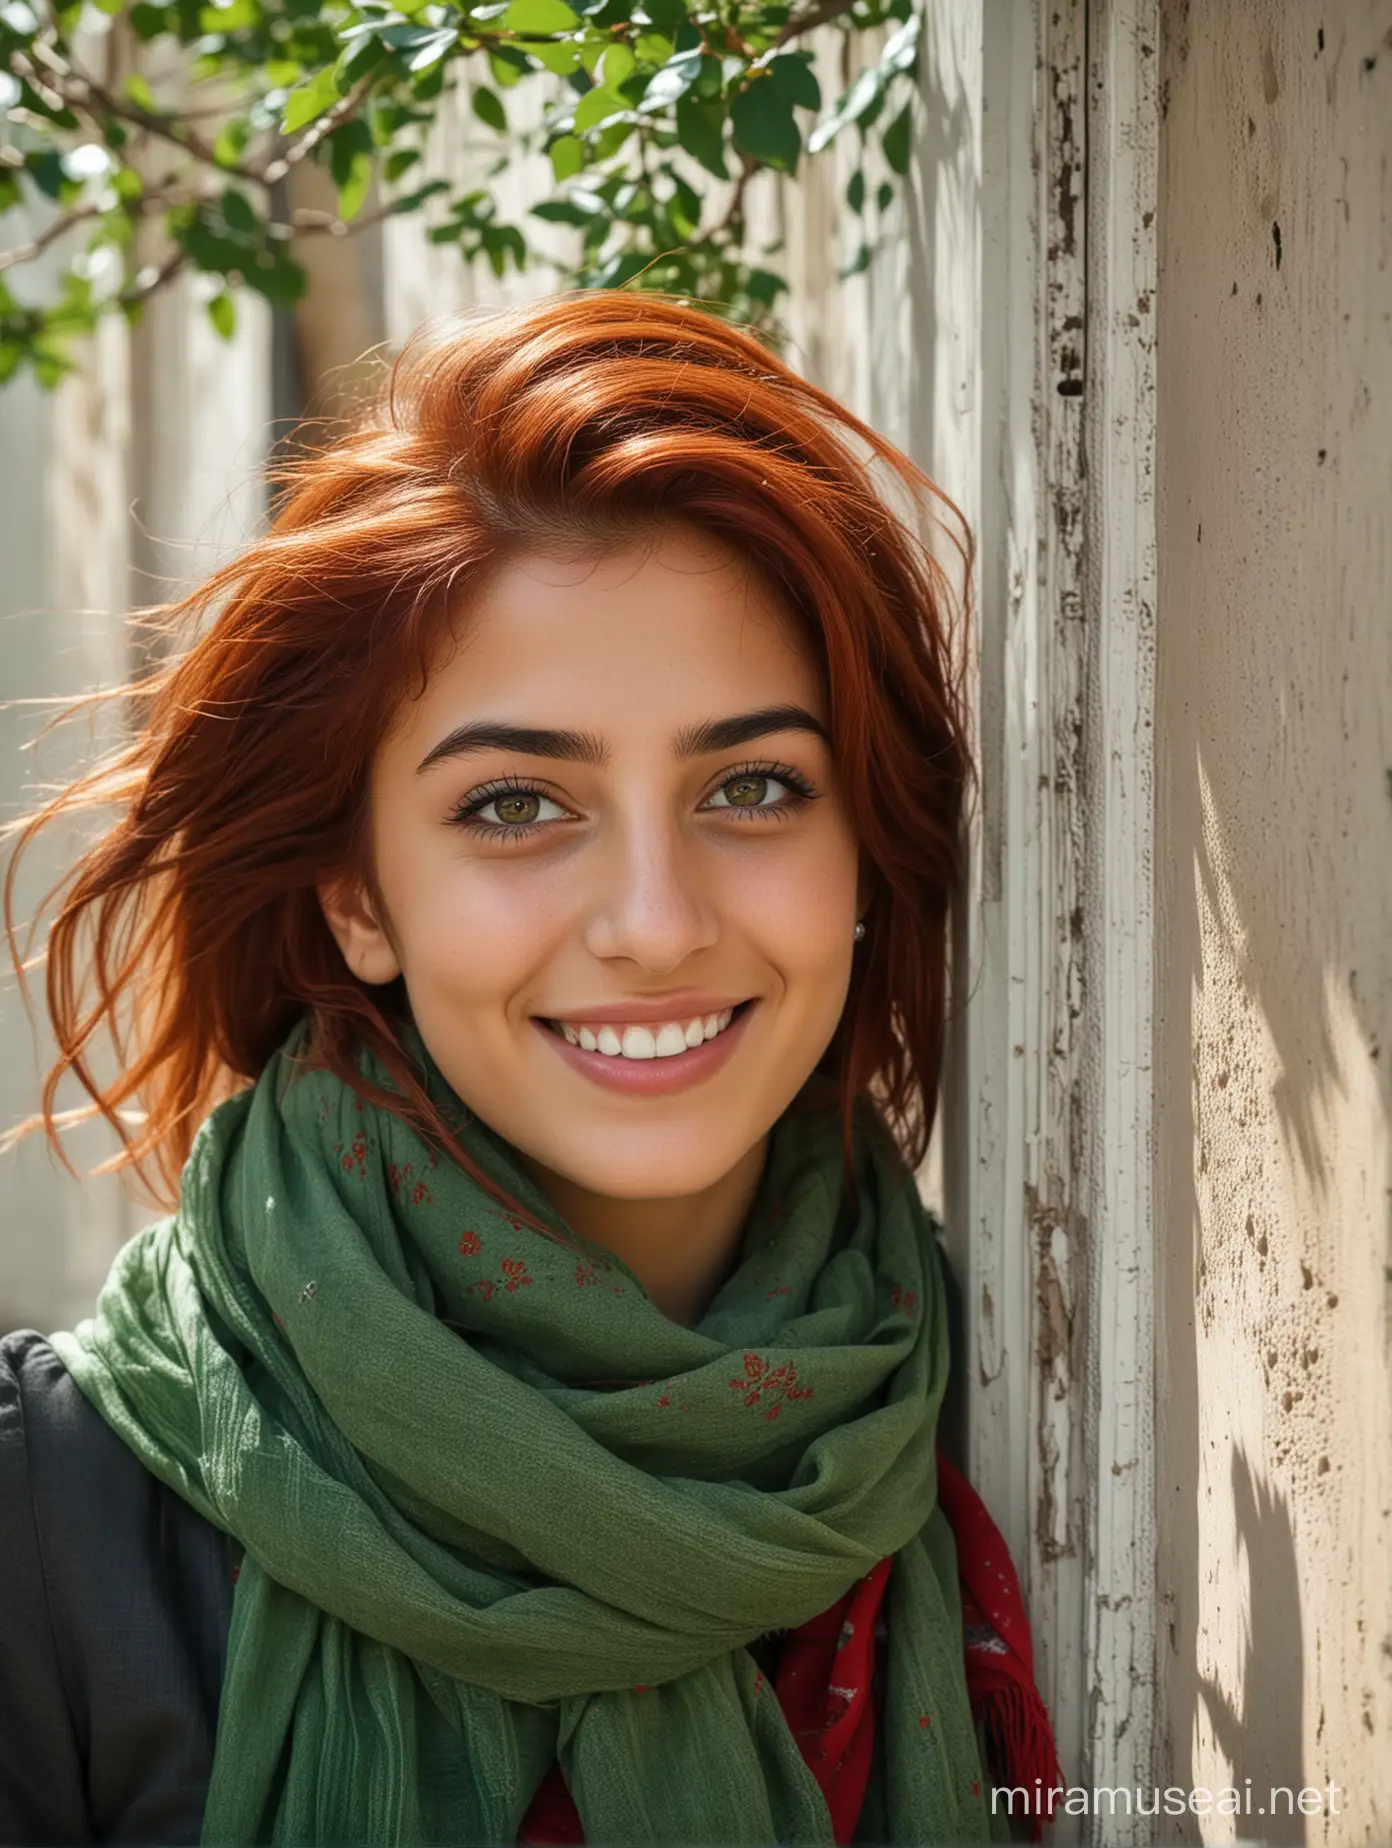 Iranian Girl in Green Scarf Smiling by Old Window